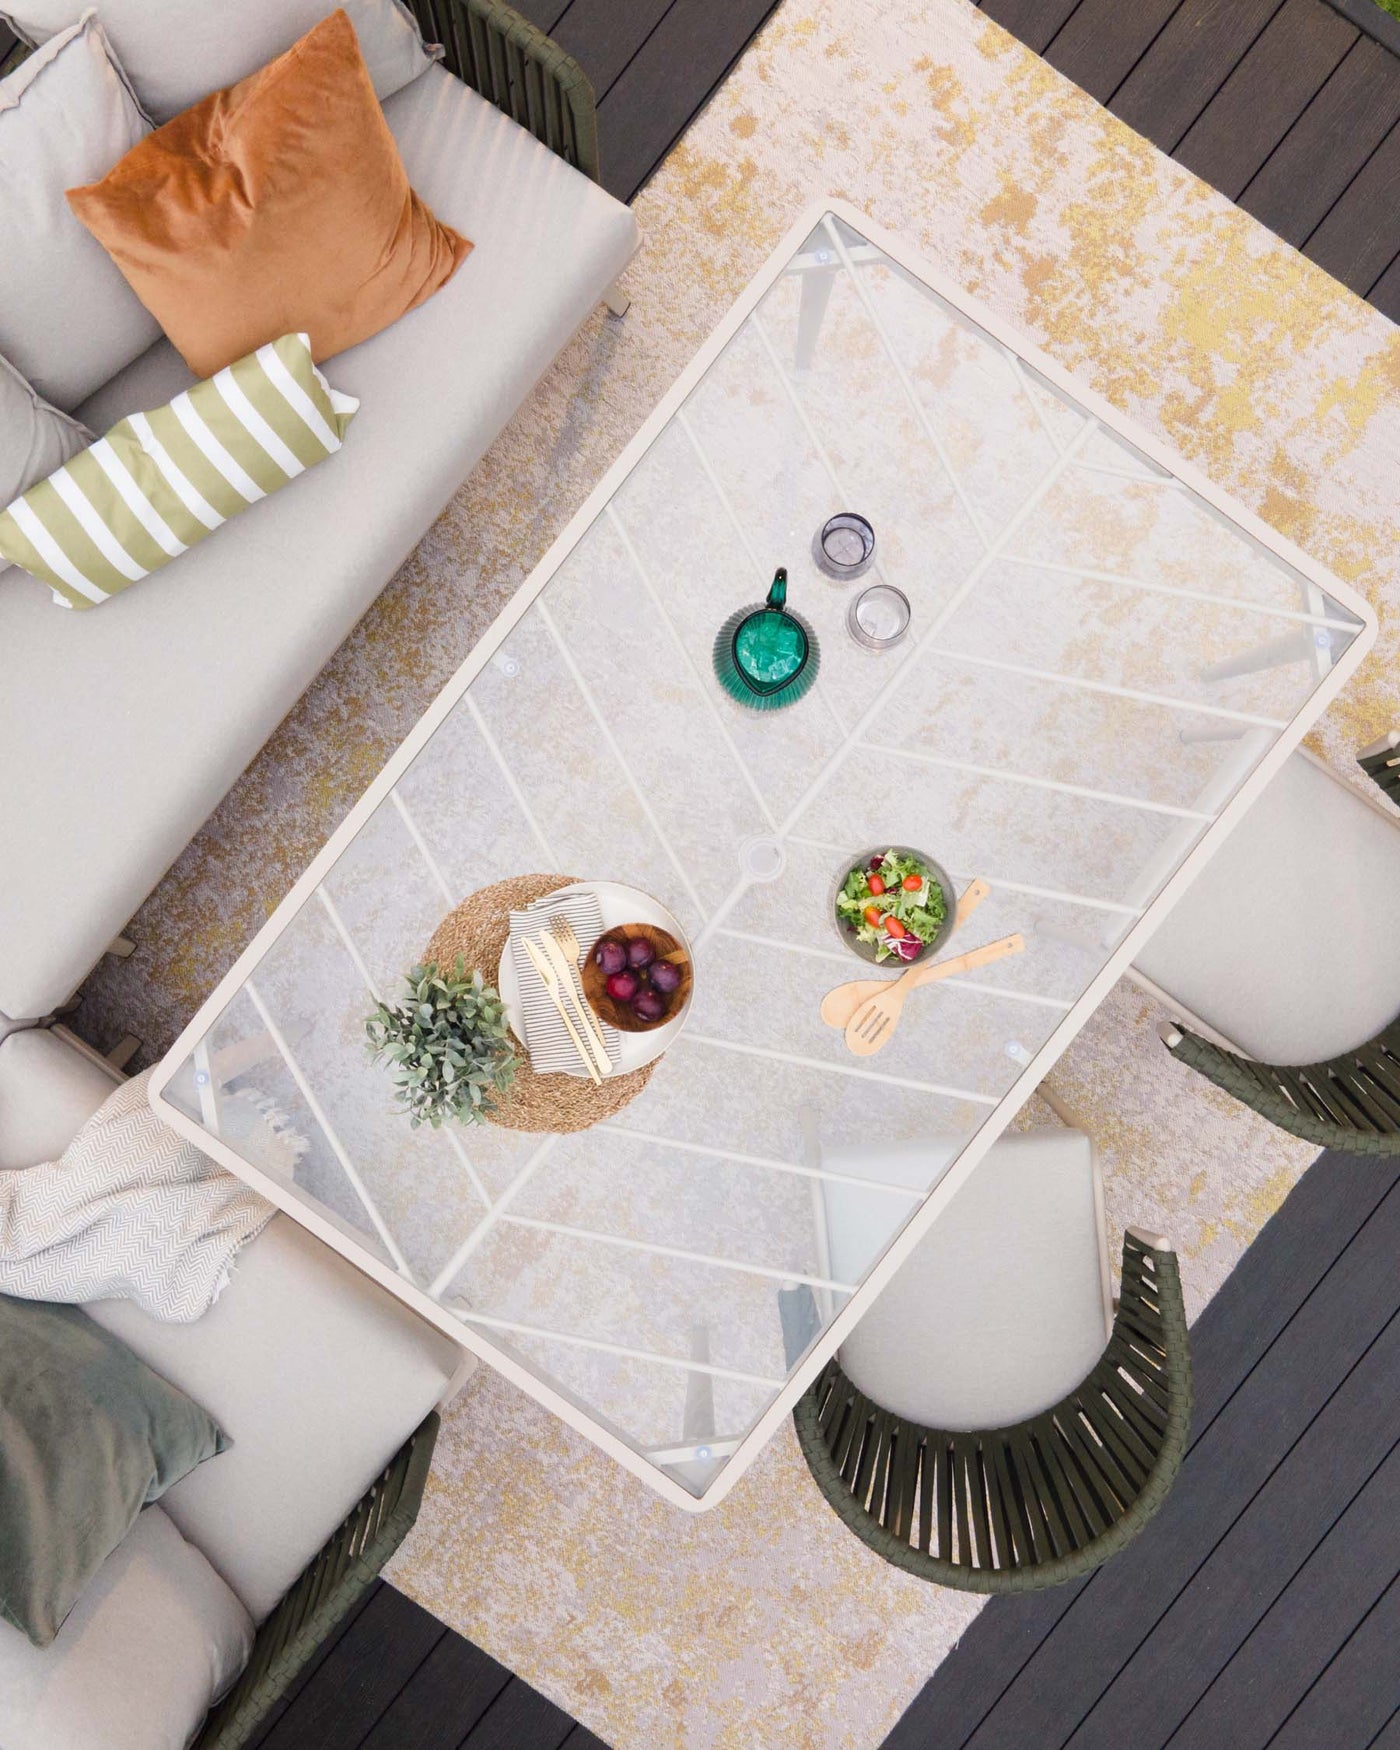 Top-down view of a modern outdoor patio furniture set including a minimalist white sofa with grey cushions and assorted decorative pillows, accompanied by a geometric white metal coffee table with a clear glass top. The set is complemented by two unique olive-green accent chairs with vertical strap design and matching seat cushions. The ensemble is arranged on an elegant mustard and cream area rug, creating an inviting and stylish outdoor living space.